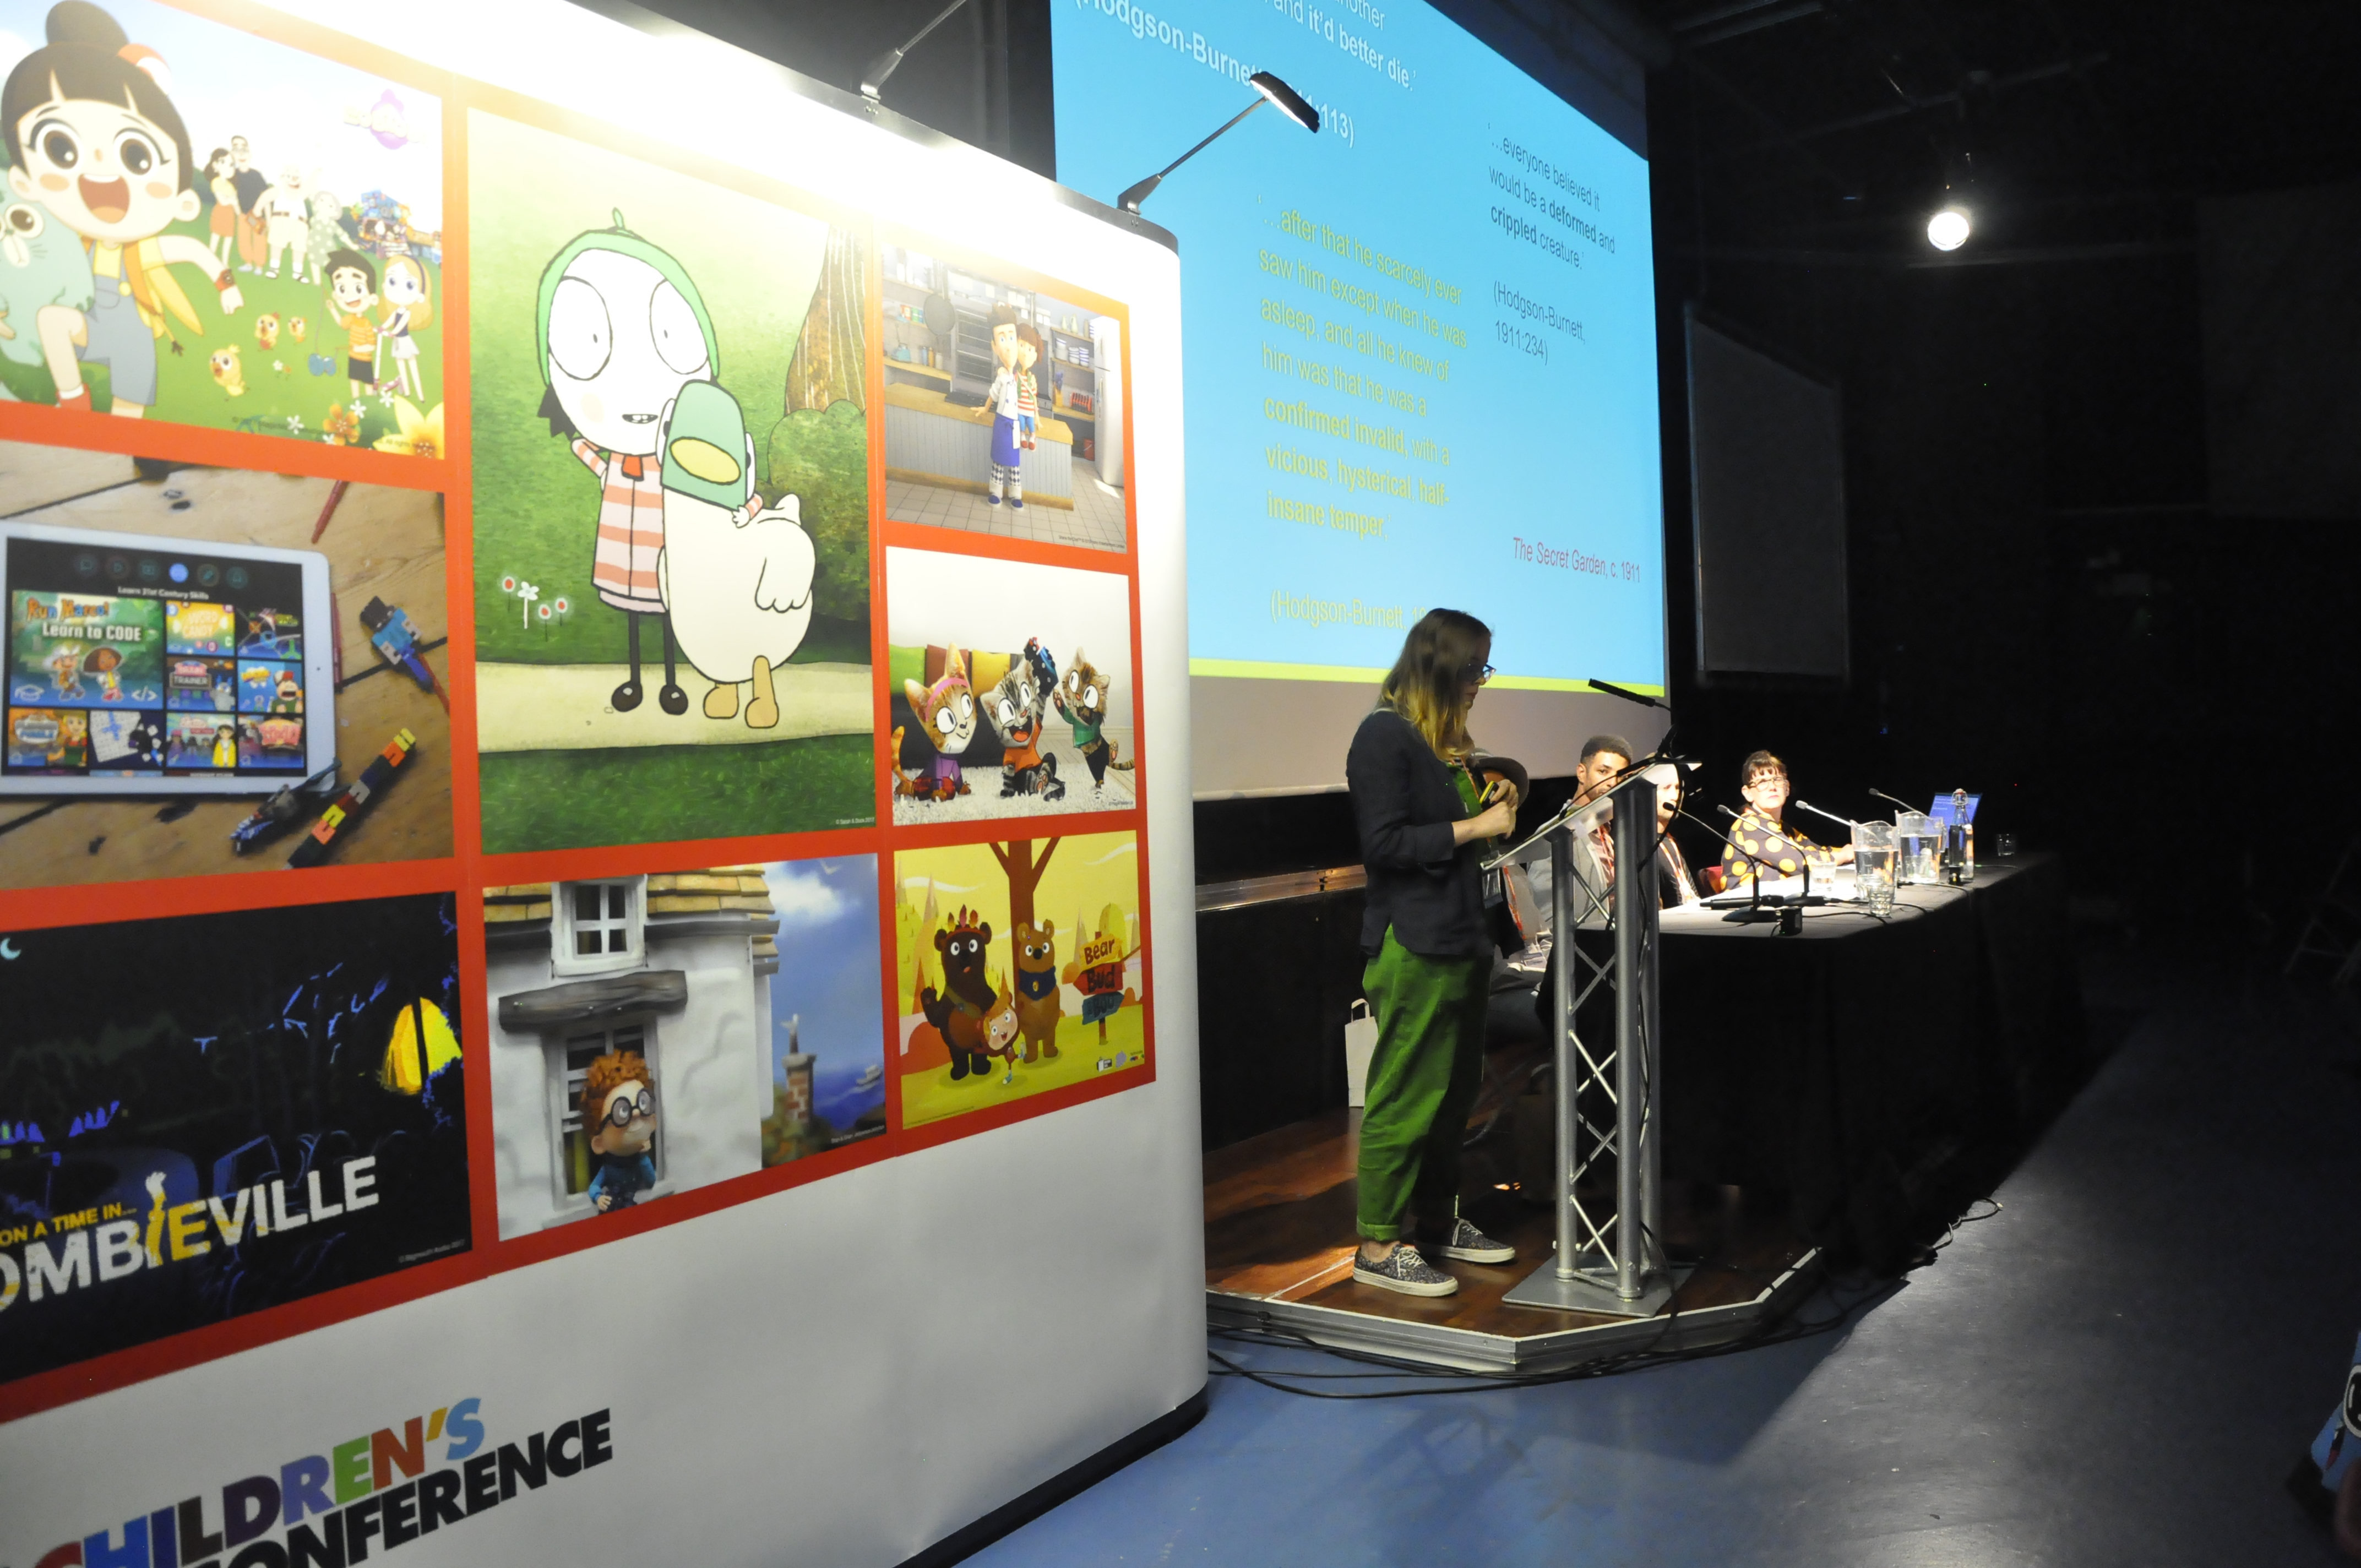 A woman stood at a lectern wearing green dungarees. You cannot see the front of her face. Next to her is a large board covered in pictures and there's a large screen on the right of the picture with a powerpoint presentation.  